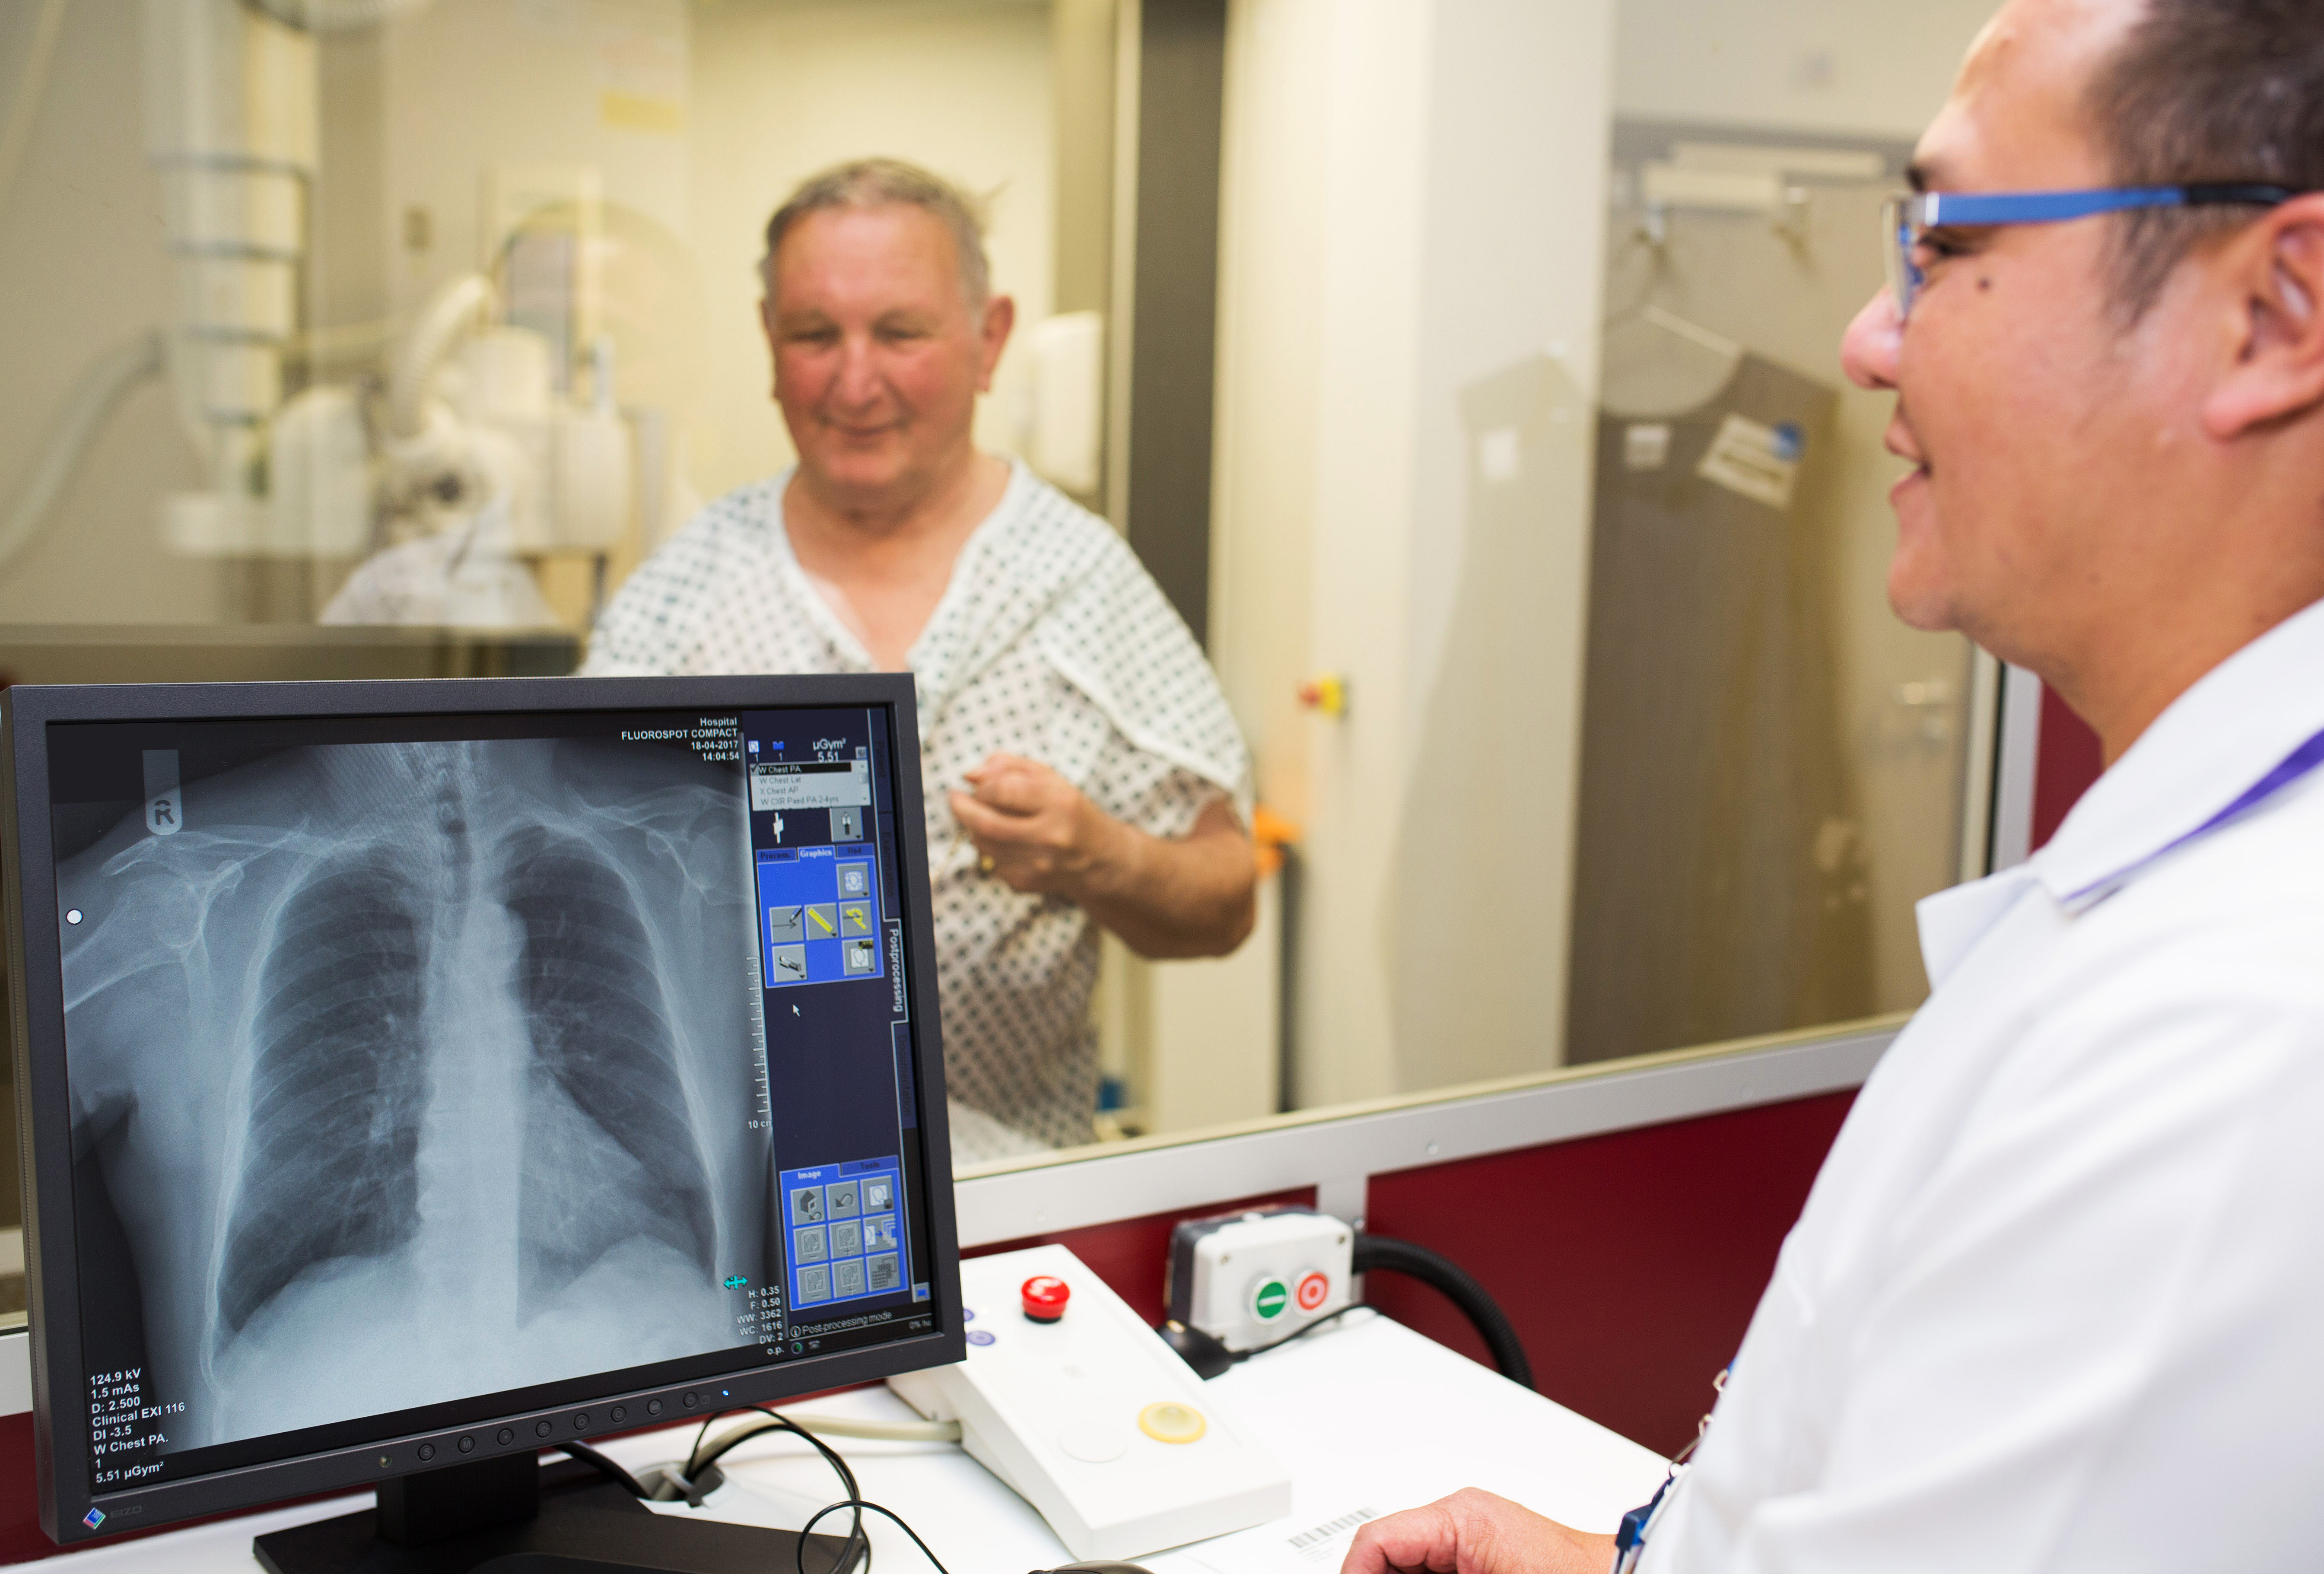 Man having xray, in the foreground you can see the x-ray technician and a picture of the person's chest x-ray